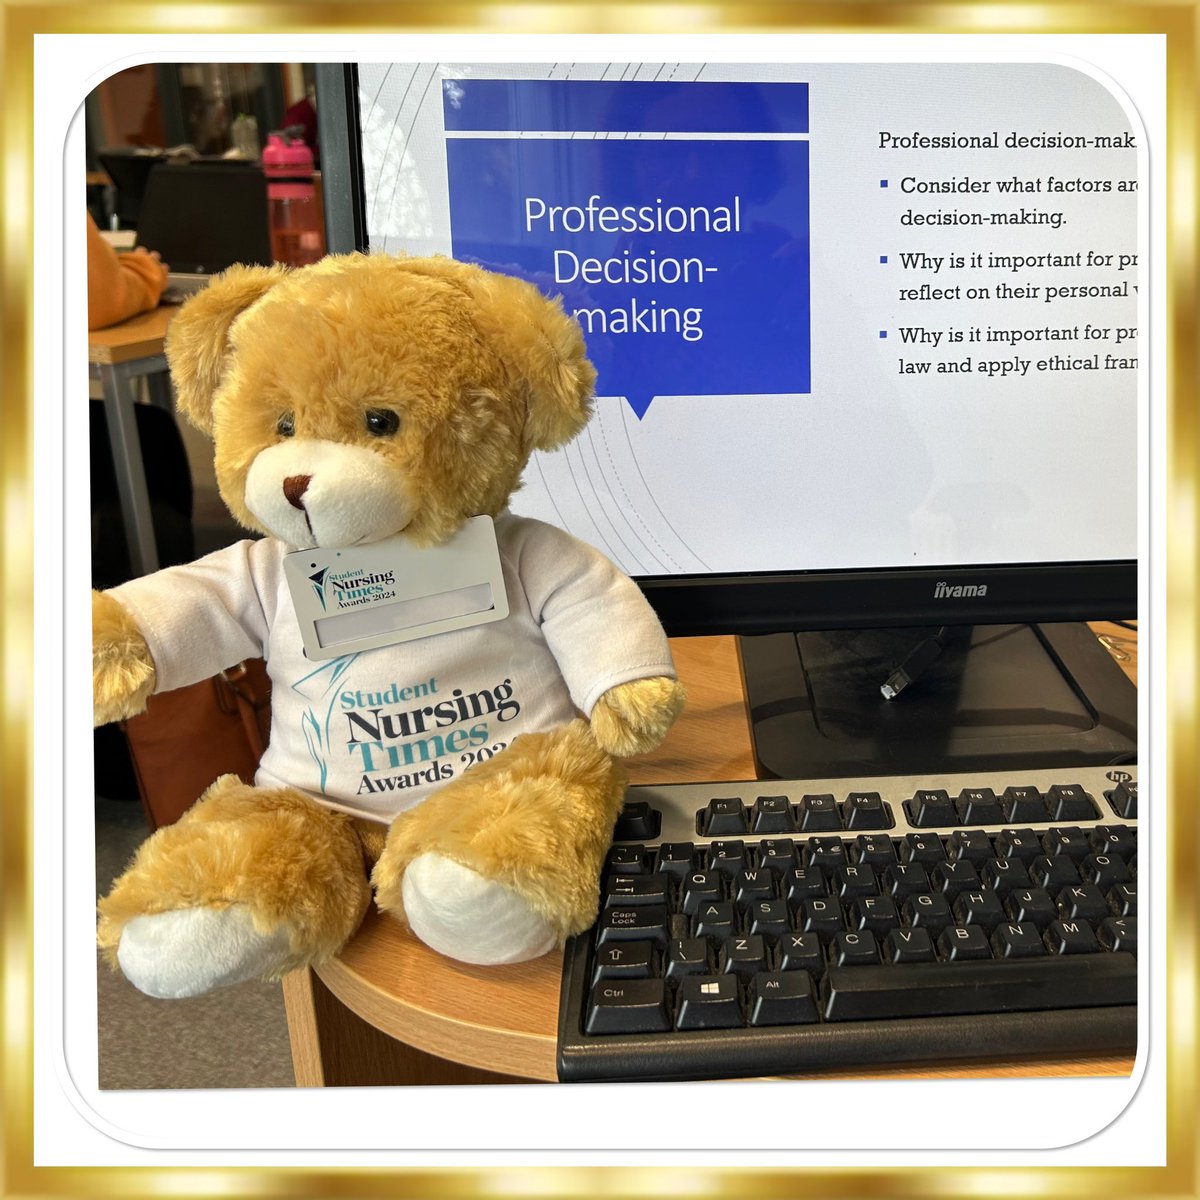 Stan is reflecting back on when he was a bear with ‘no name’. He now realises how identity is important, he has learnt some valuable lessons also about what a professional is.@NursingTimes #SNTABear